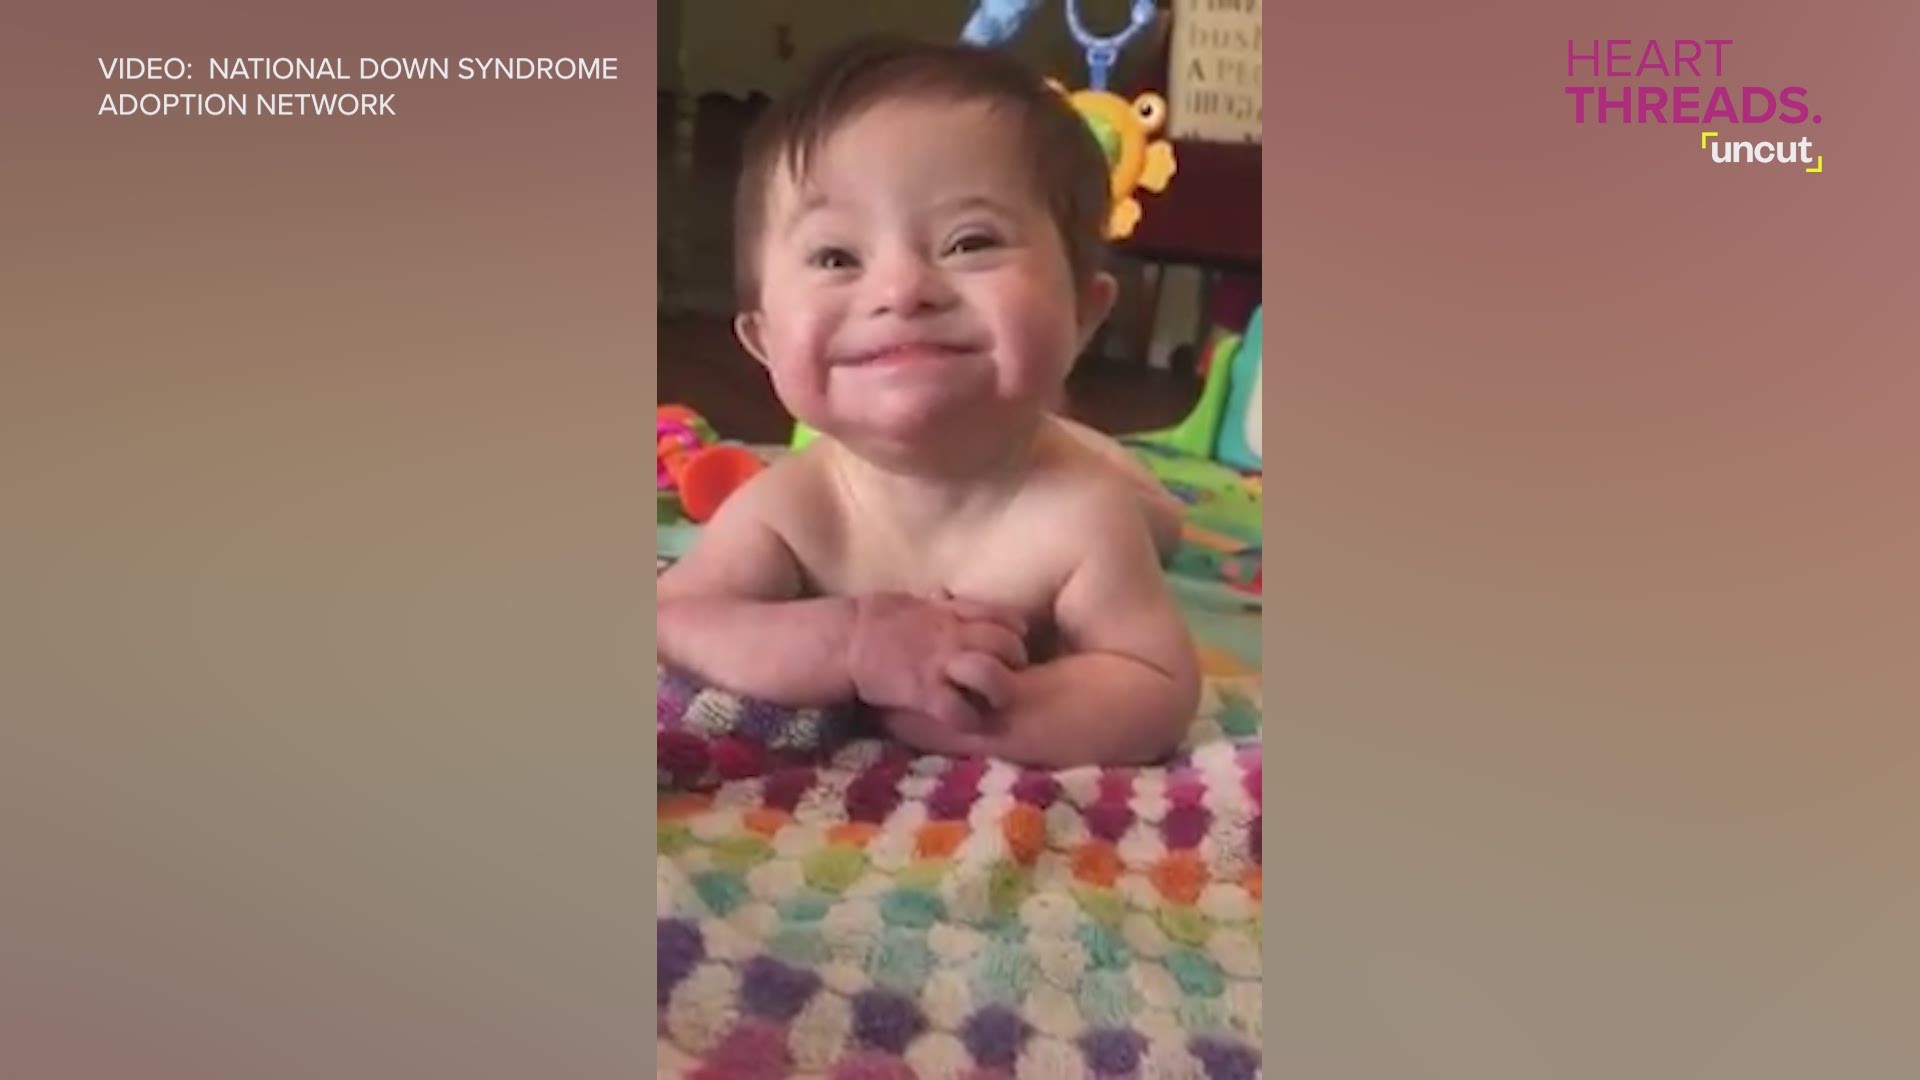 This little girl's infectious smile will brighten your day.